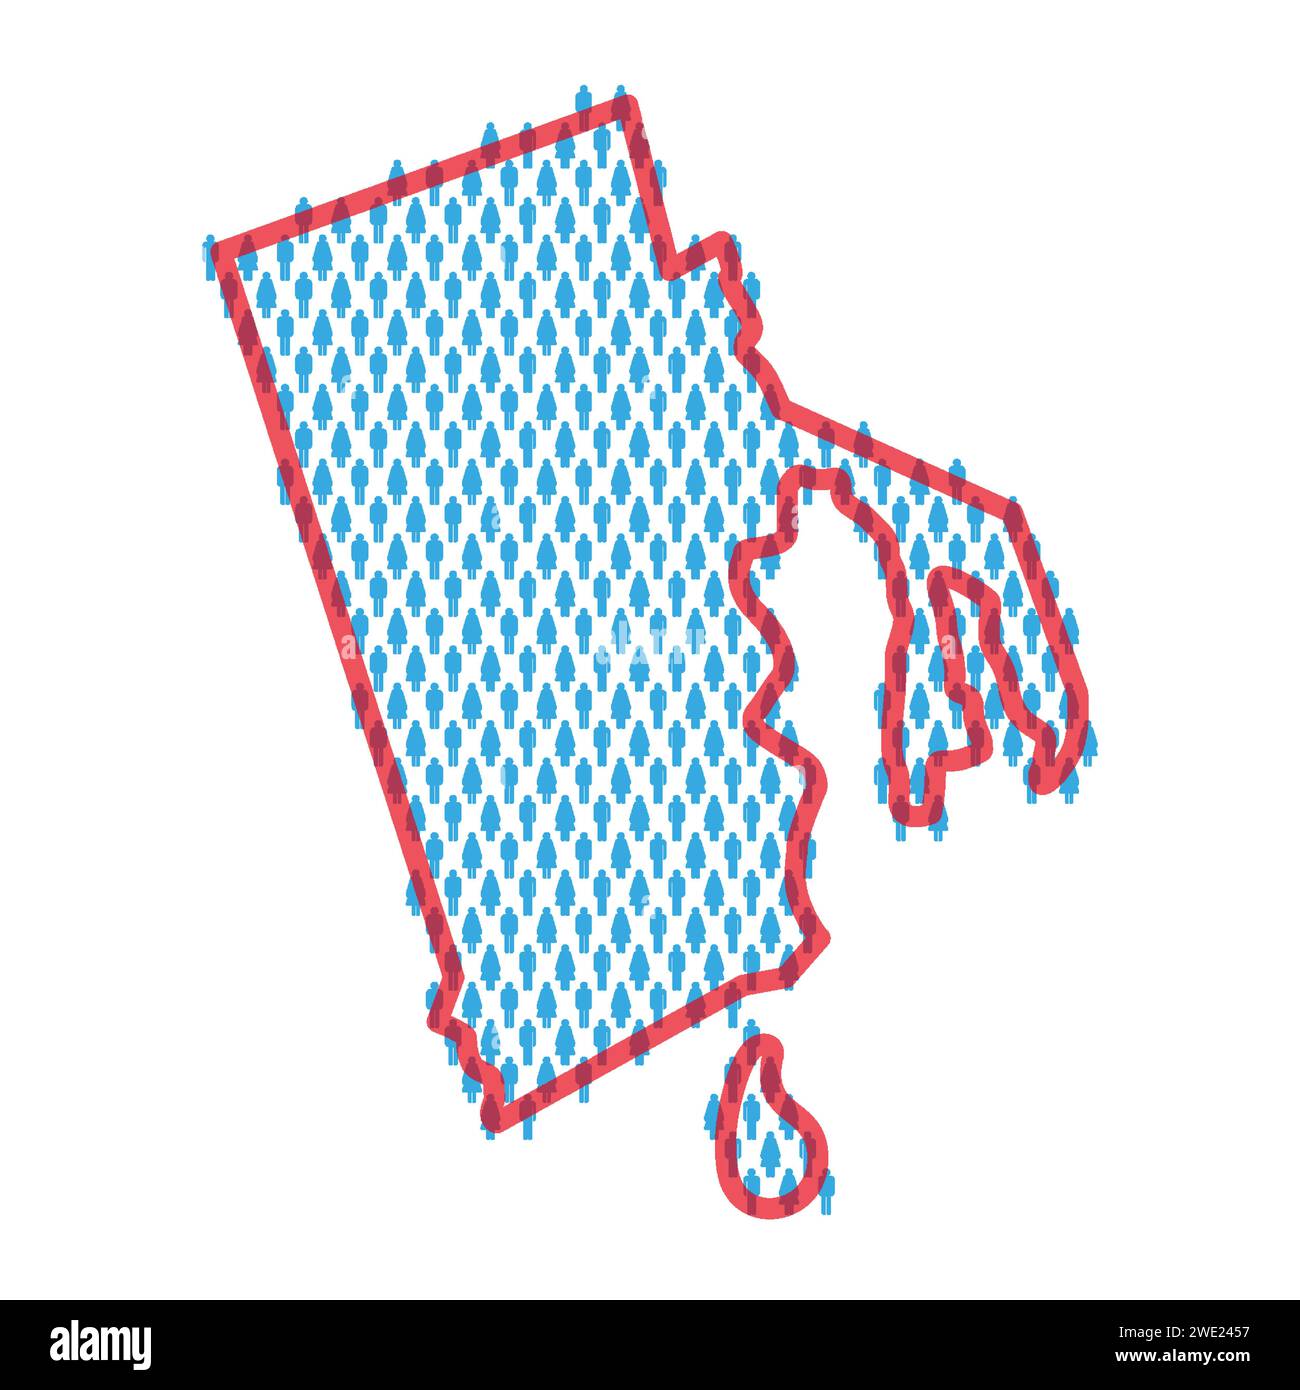 Rhode Island population map. Stick figures people map with bold red translucent state border. Pattern of men and women icons. Isolated vector illustra Stock Vector